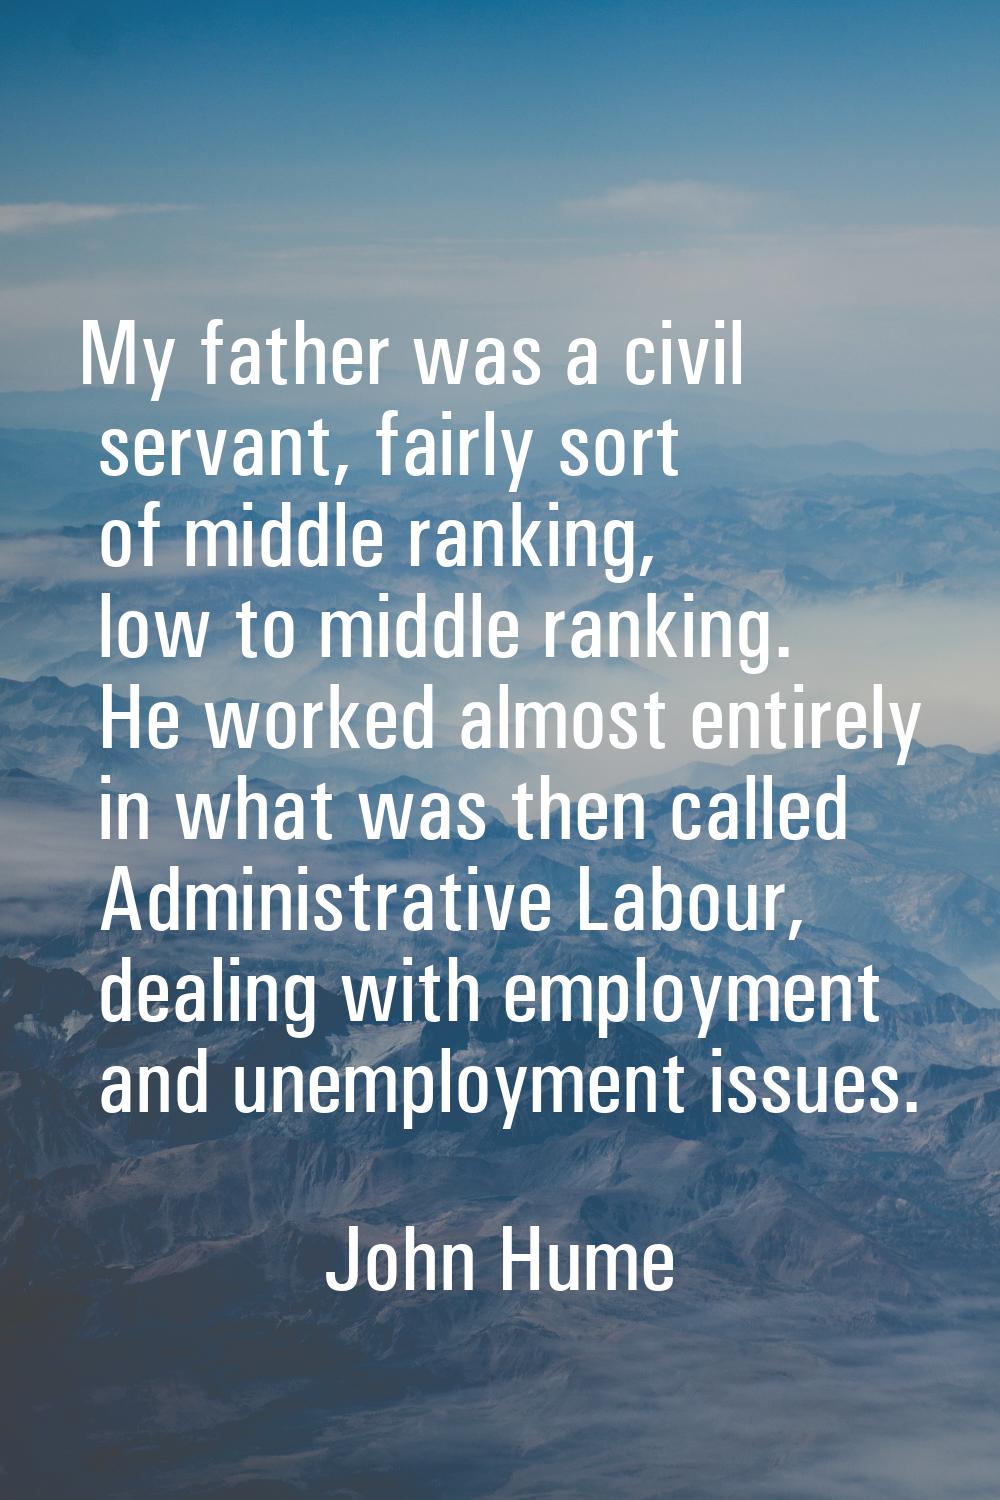 My father was a civil servant, fairly sort of middle ranking, low to middle ranking. He worked almo